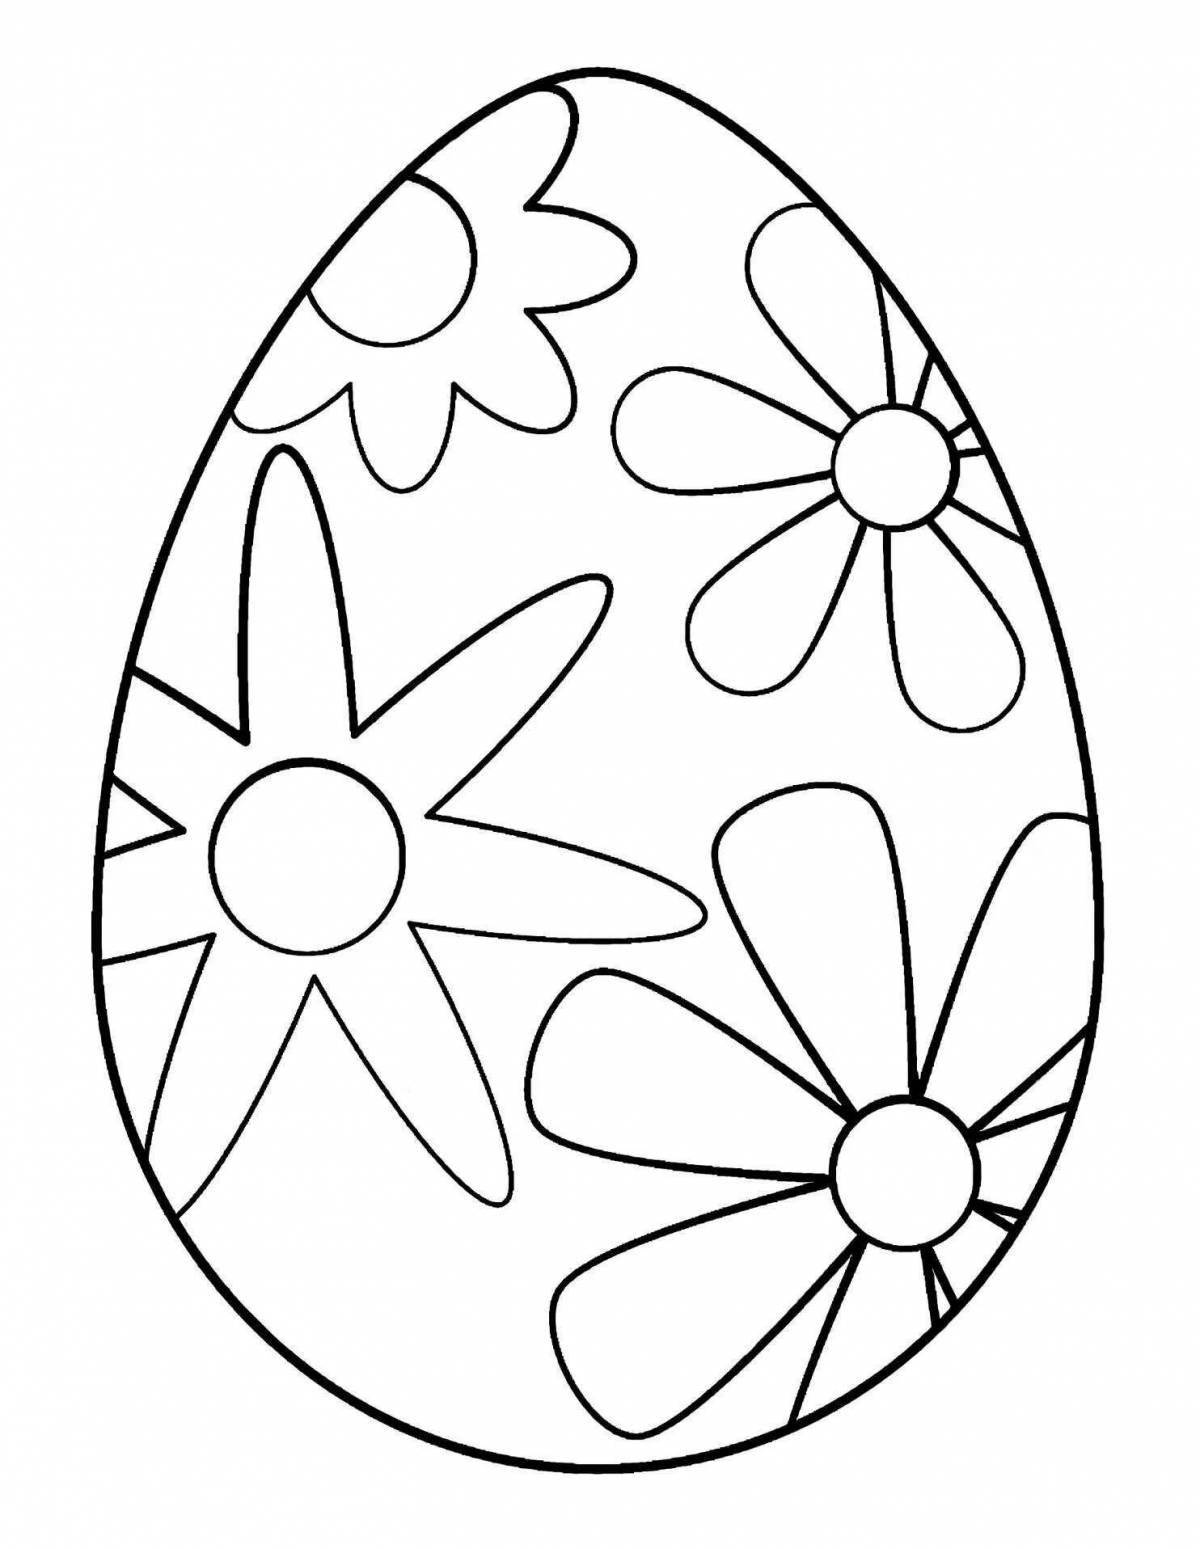 Sparkling chicken egg coloring page